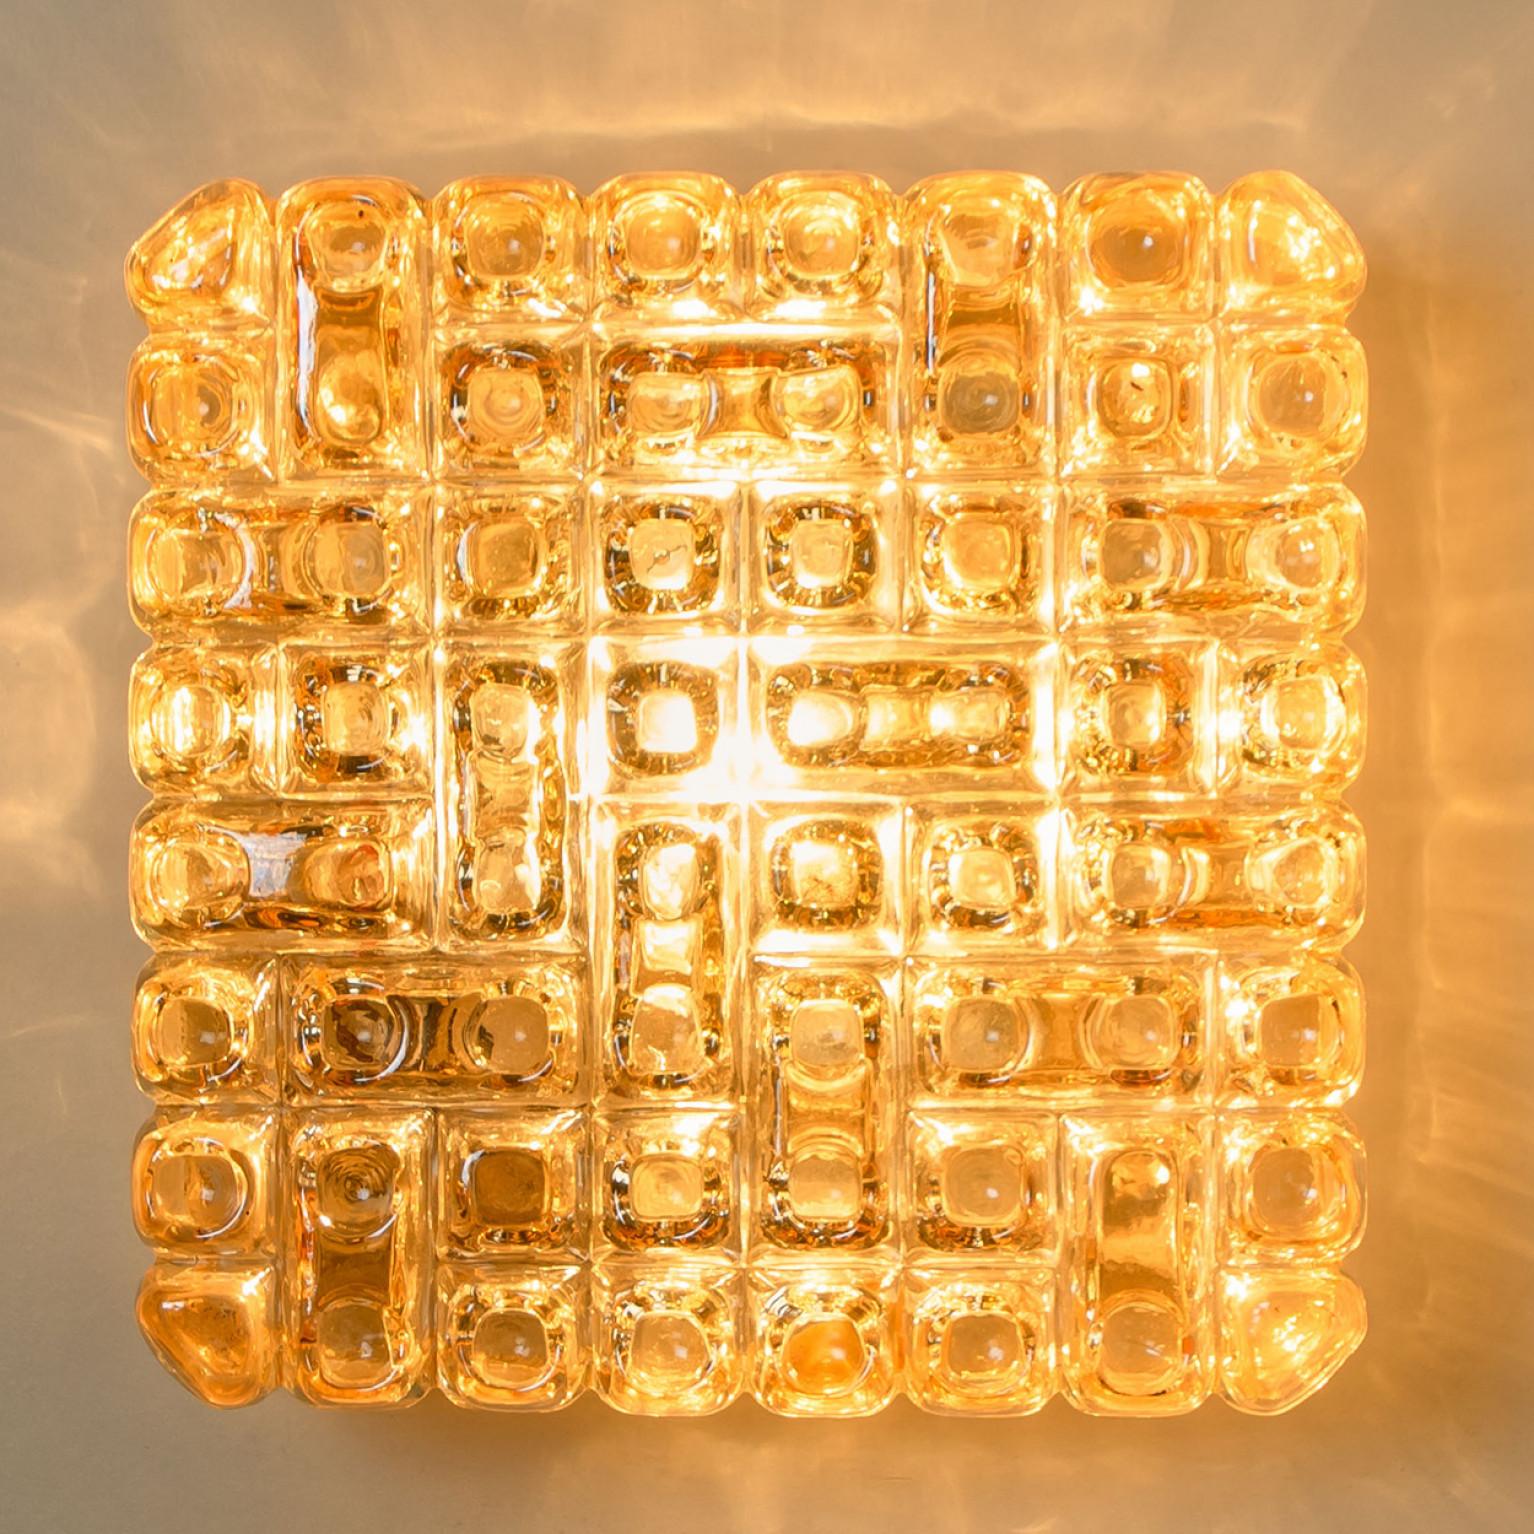 Square shaped wall lights in bubble textured glass with gold details. Manufactured in Germany during the 1960s. ERCO is a leading international specialist in architectural lighting. The 1934 established family business now operates as a global